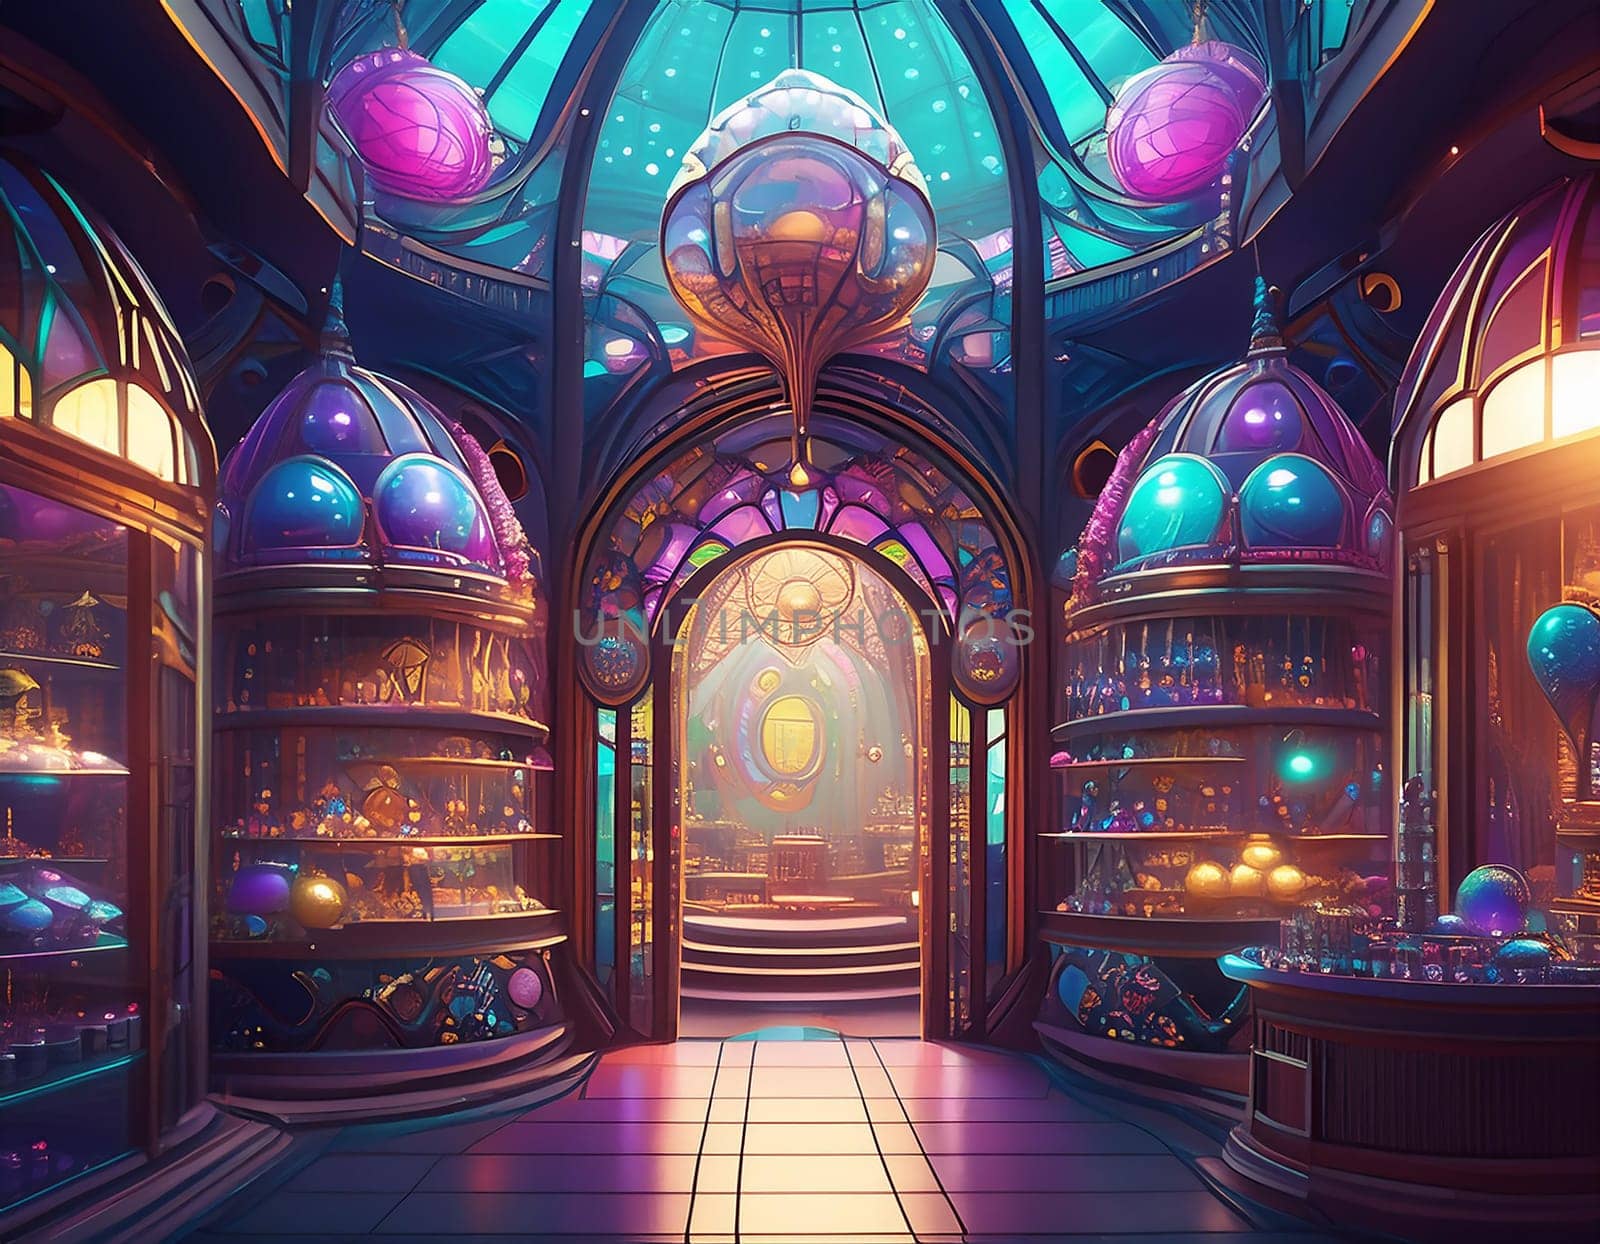 A fantasy store selling magical items in a fancy shop full of glass ornamental decor.